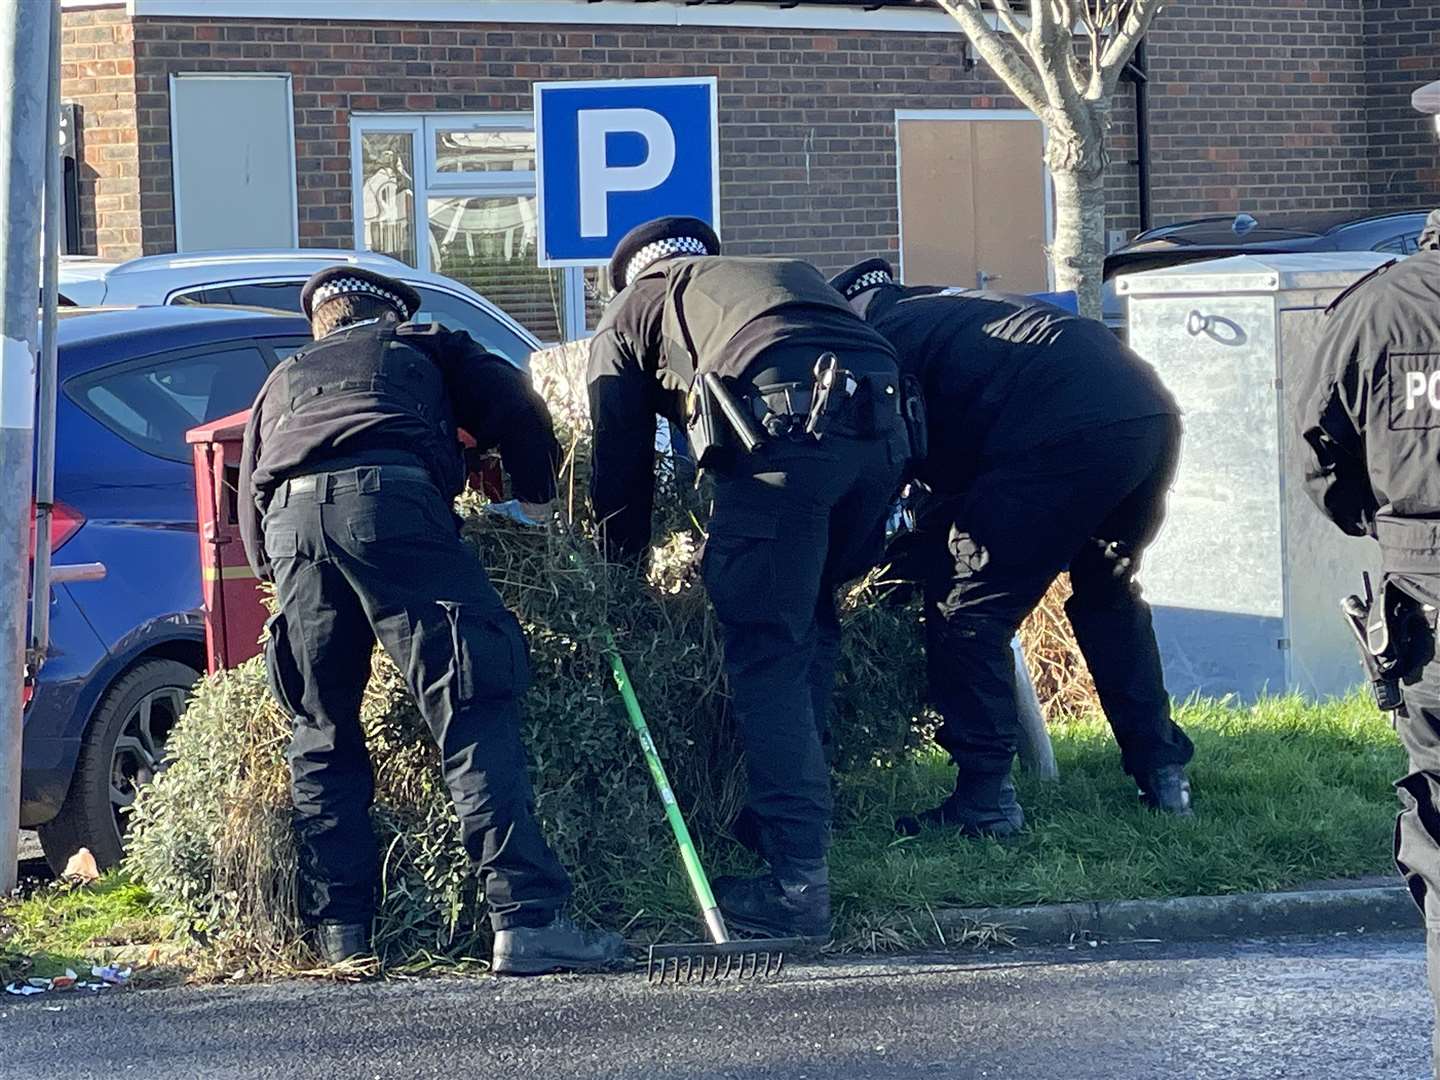 Police searched bushes following the attack in January